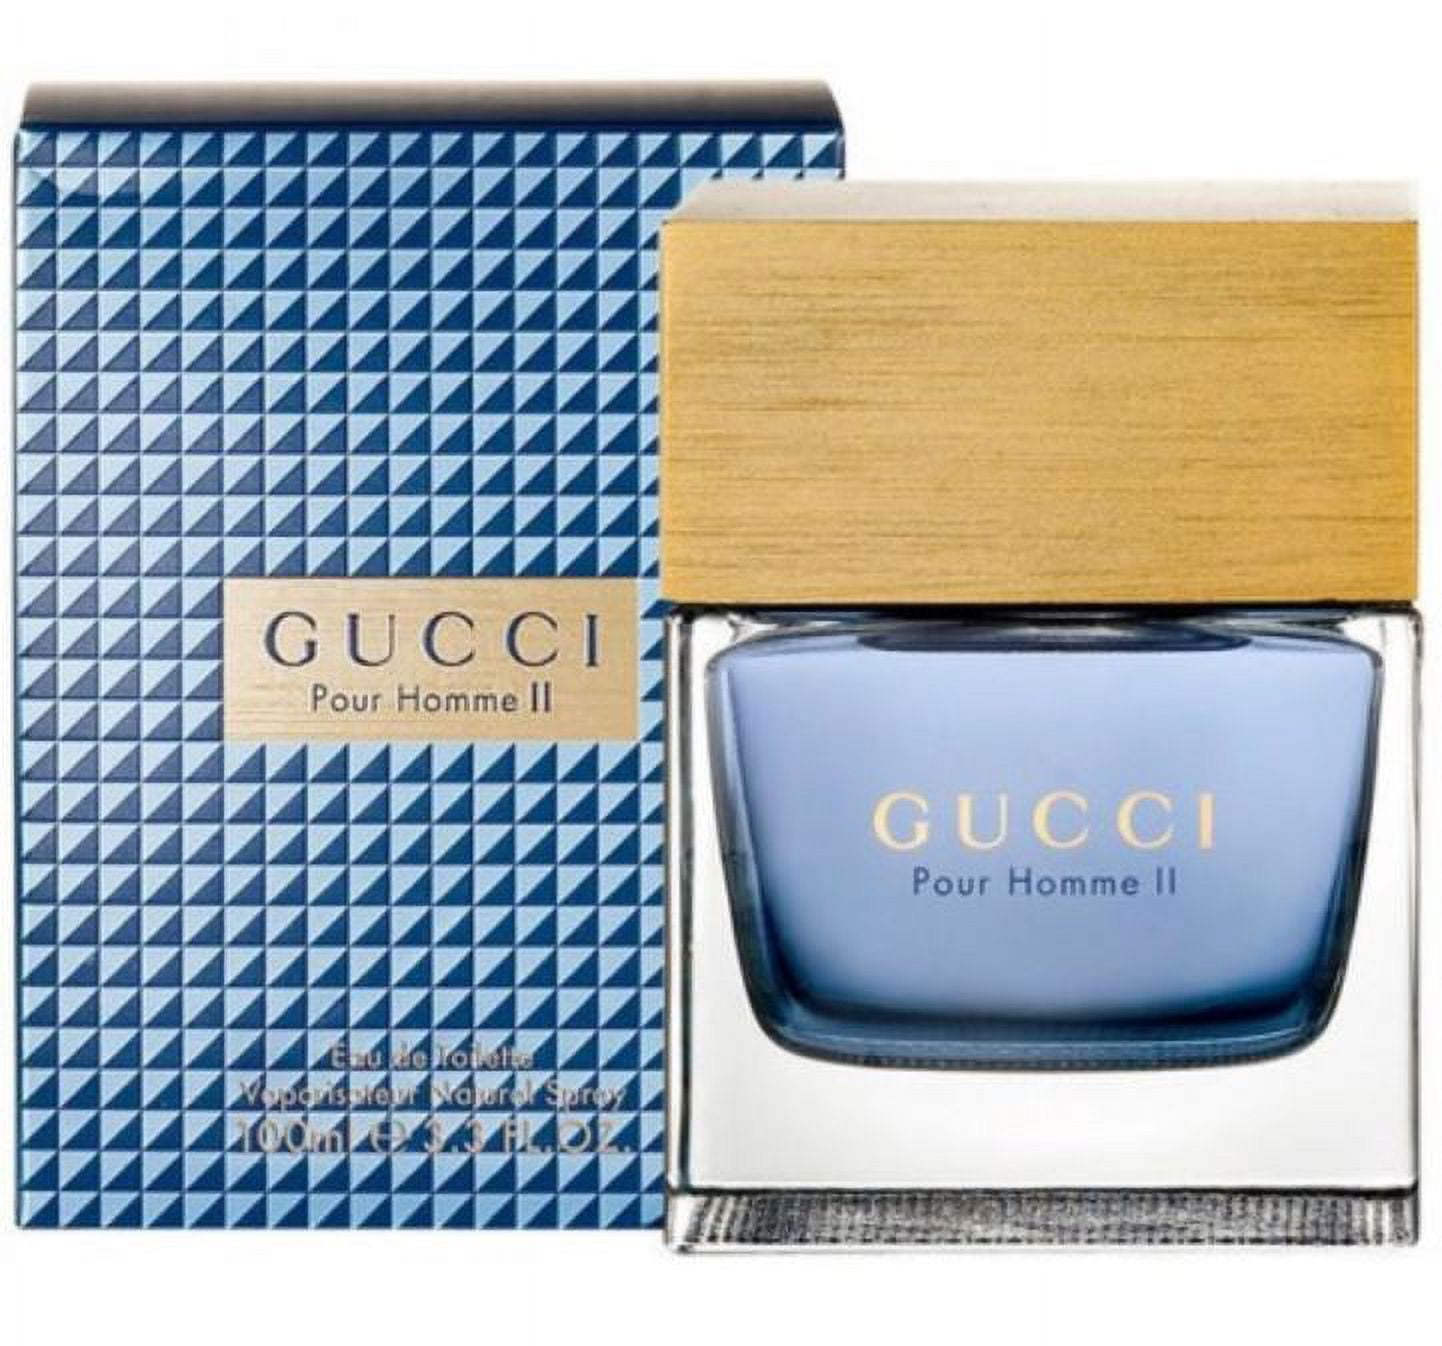 Pour homme 2. Gucci "Gucci pour homme" 100 ml. Gucci pour homme II. Туалетная вода Gucci pour homme II. Gucci туалетная вода Gucci pour homme II.